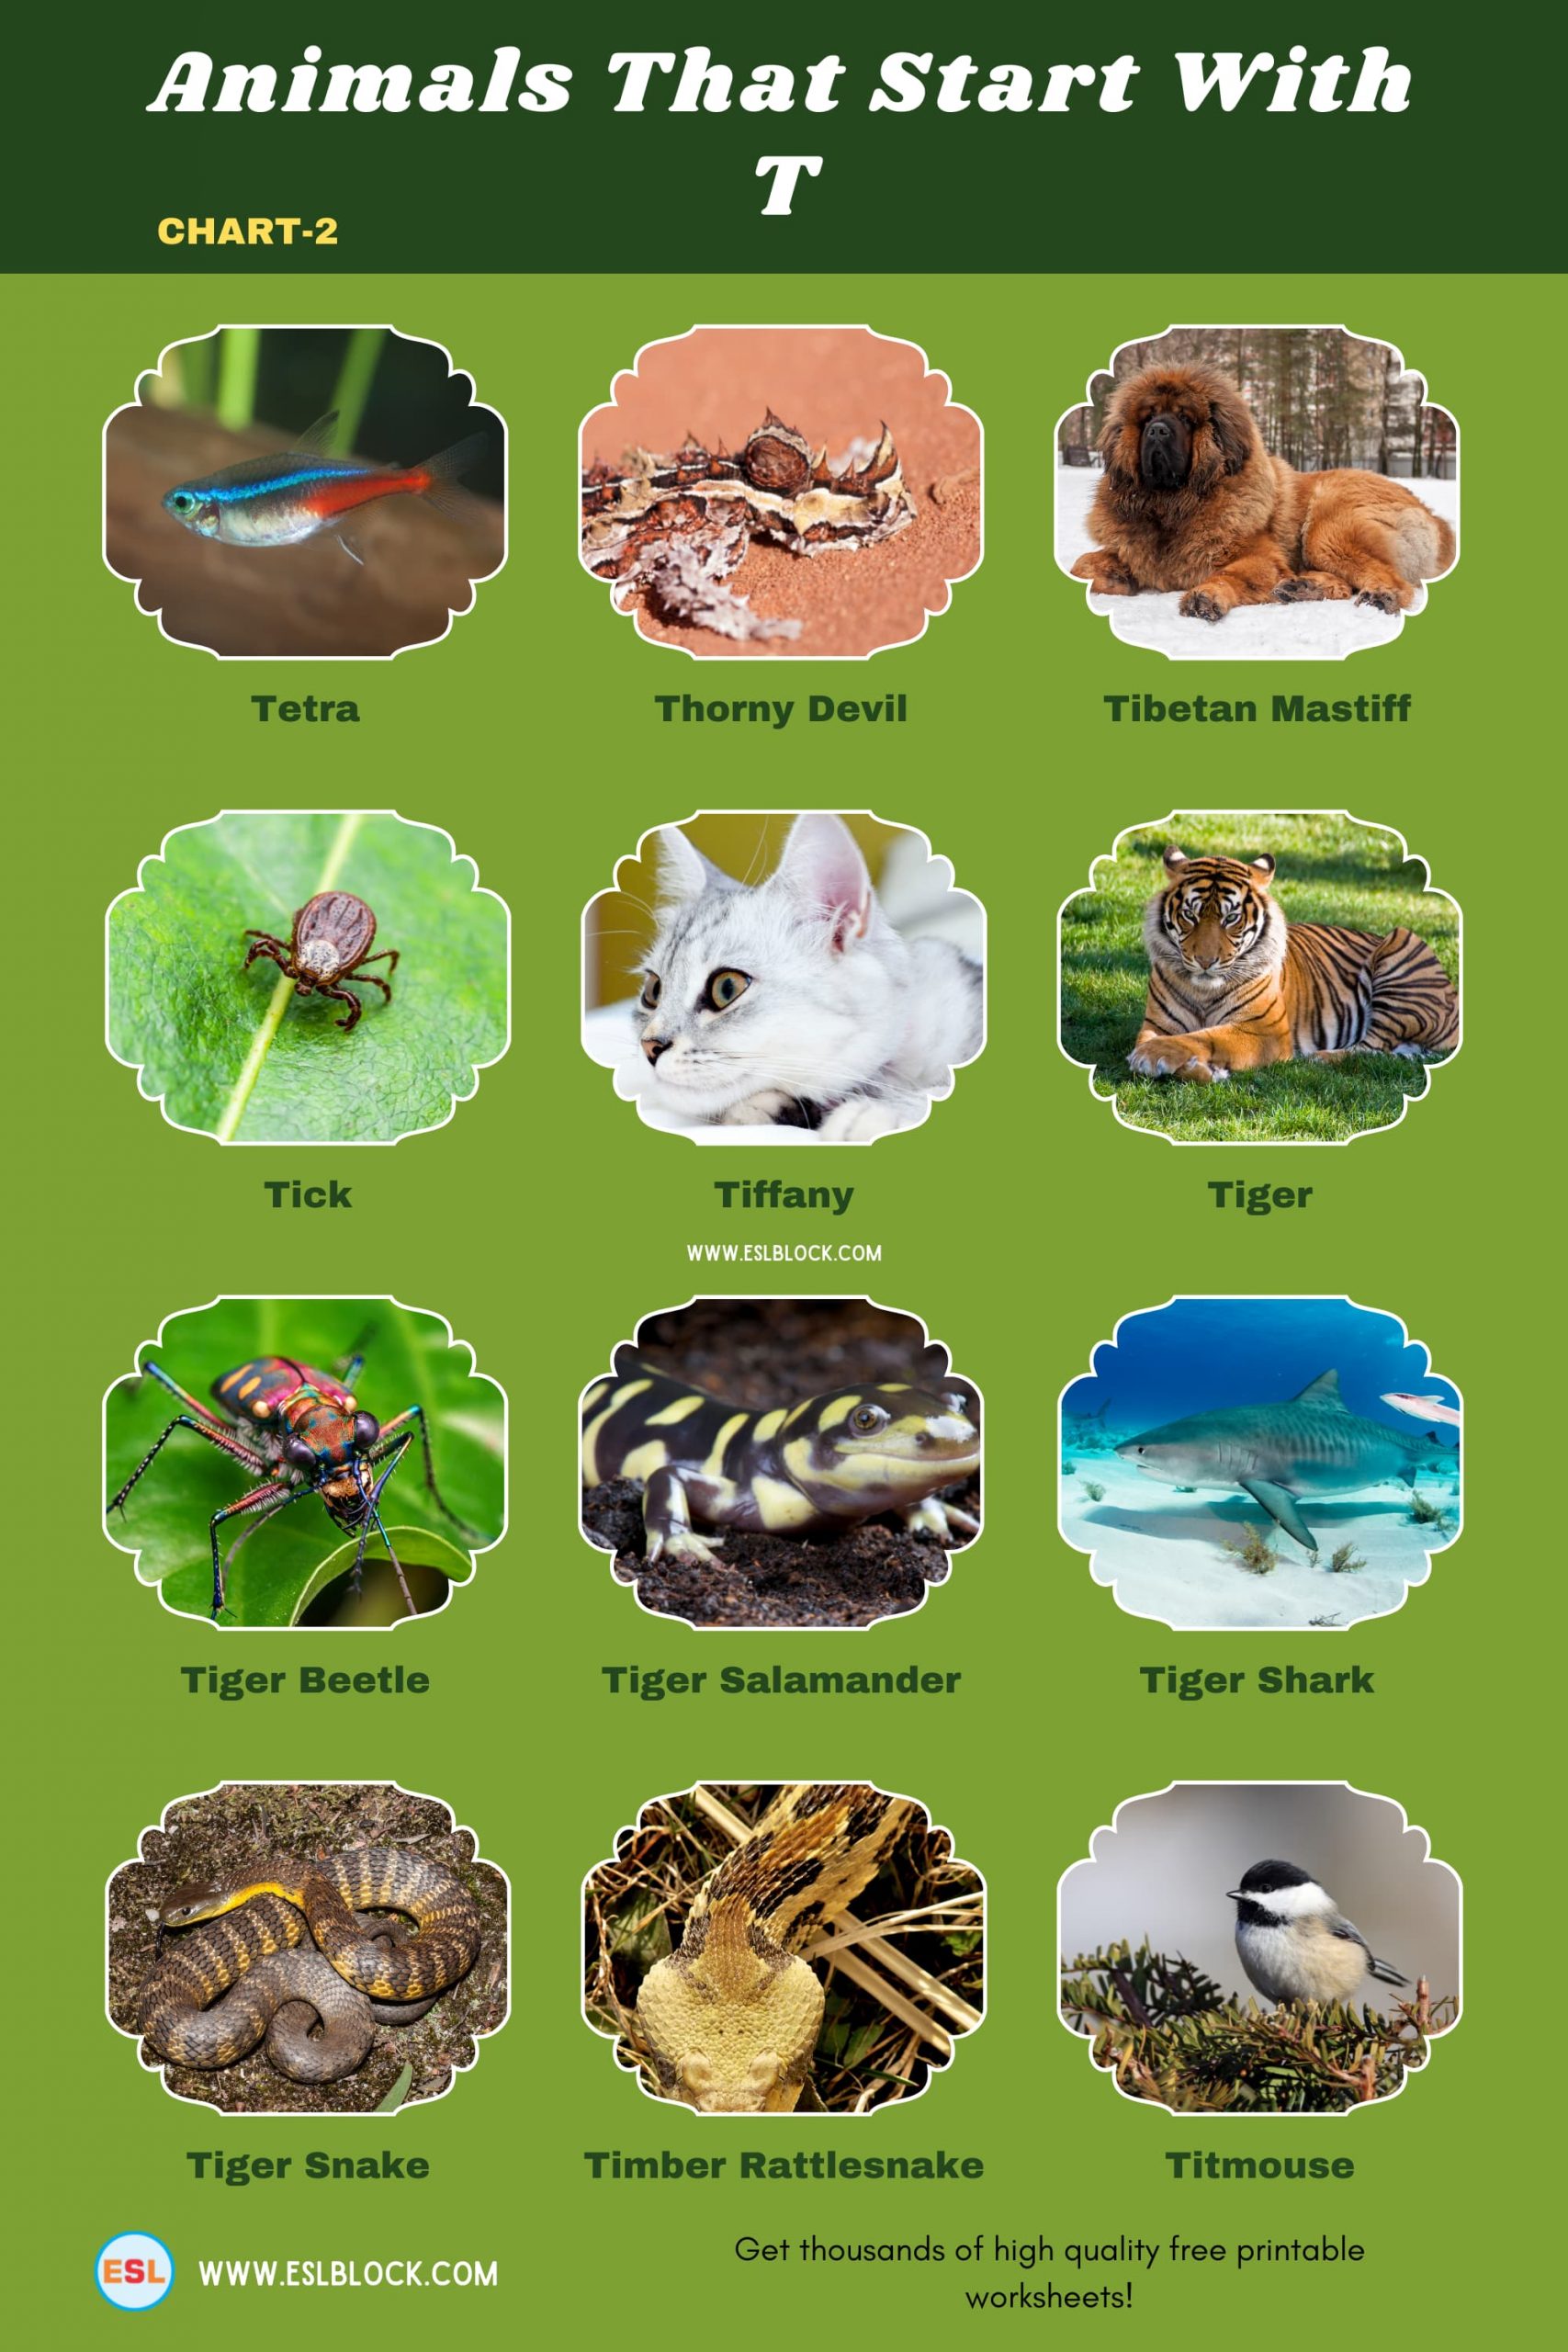 5 Letter Animals Starting With T, Animals List, Animals Names, Animals That Begins With T, Animals That Start With T, English, English Nouns, English Vocabulary, English Words, List of Animals That Start With T, Nouns, T Animals, T Animals in English, T Animals Names, Vocabulary